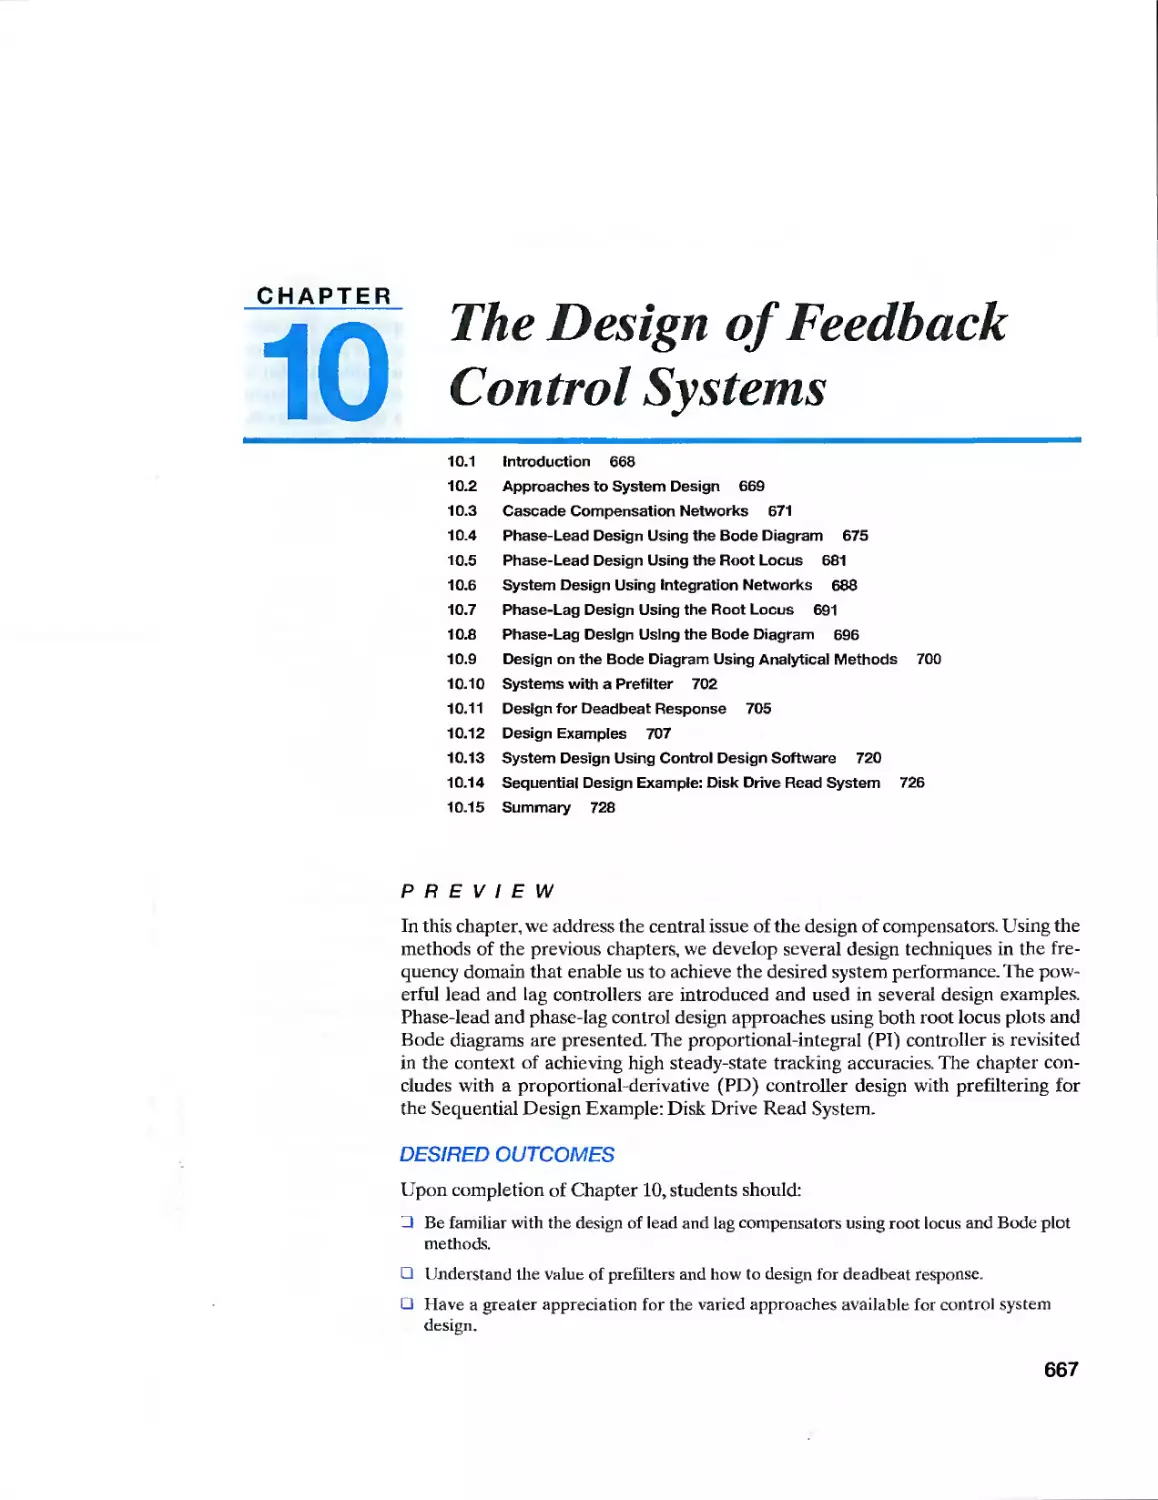 10 The Design of Feedback Control Systems